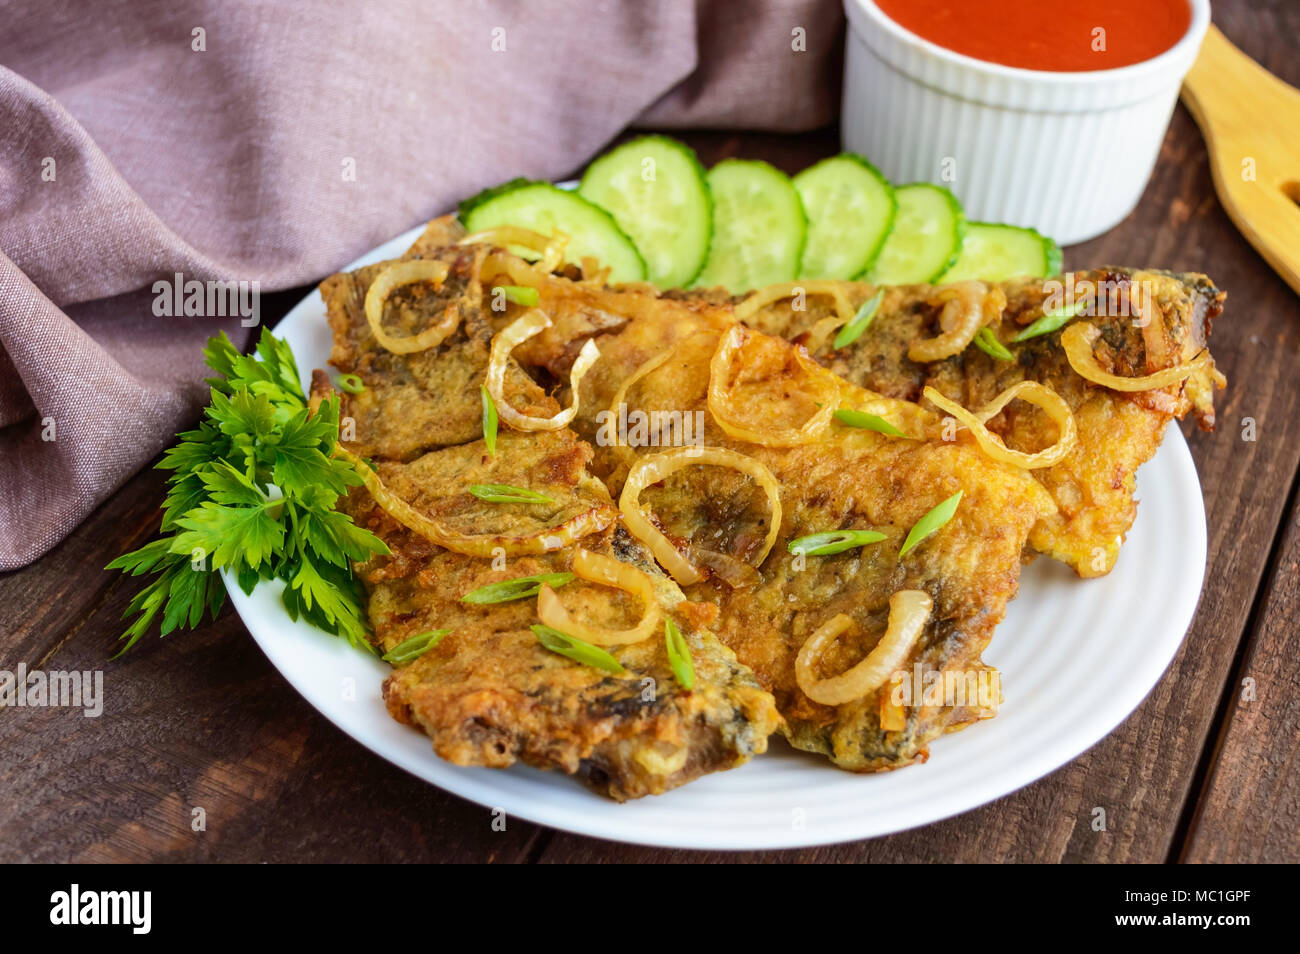 Fried carp fish fillet in batter on wooden table Stock Photo